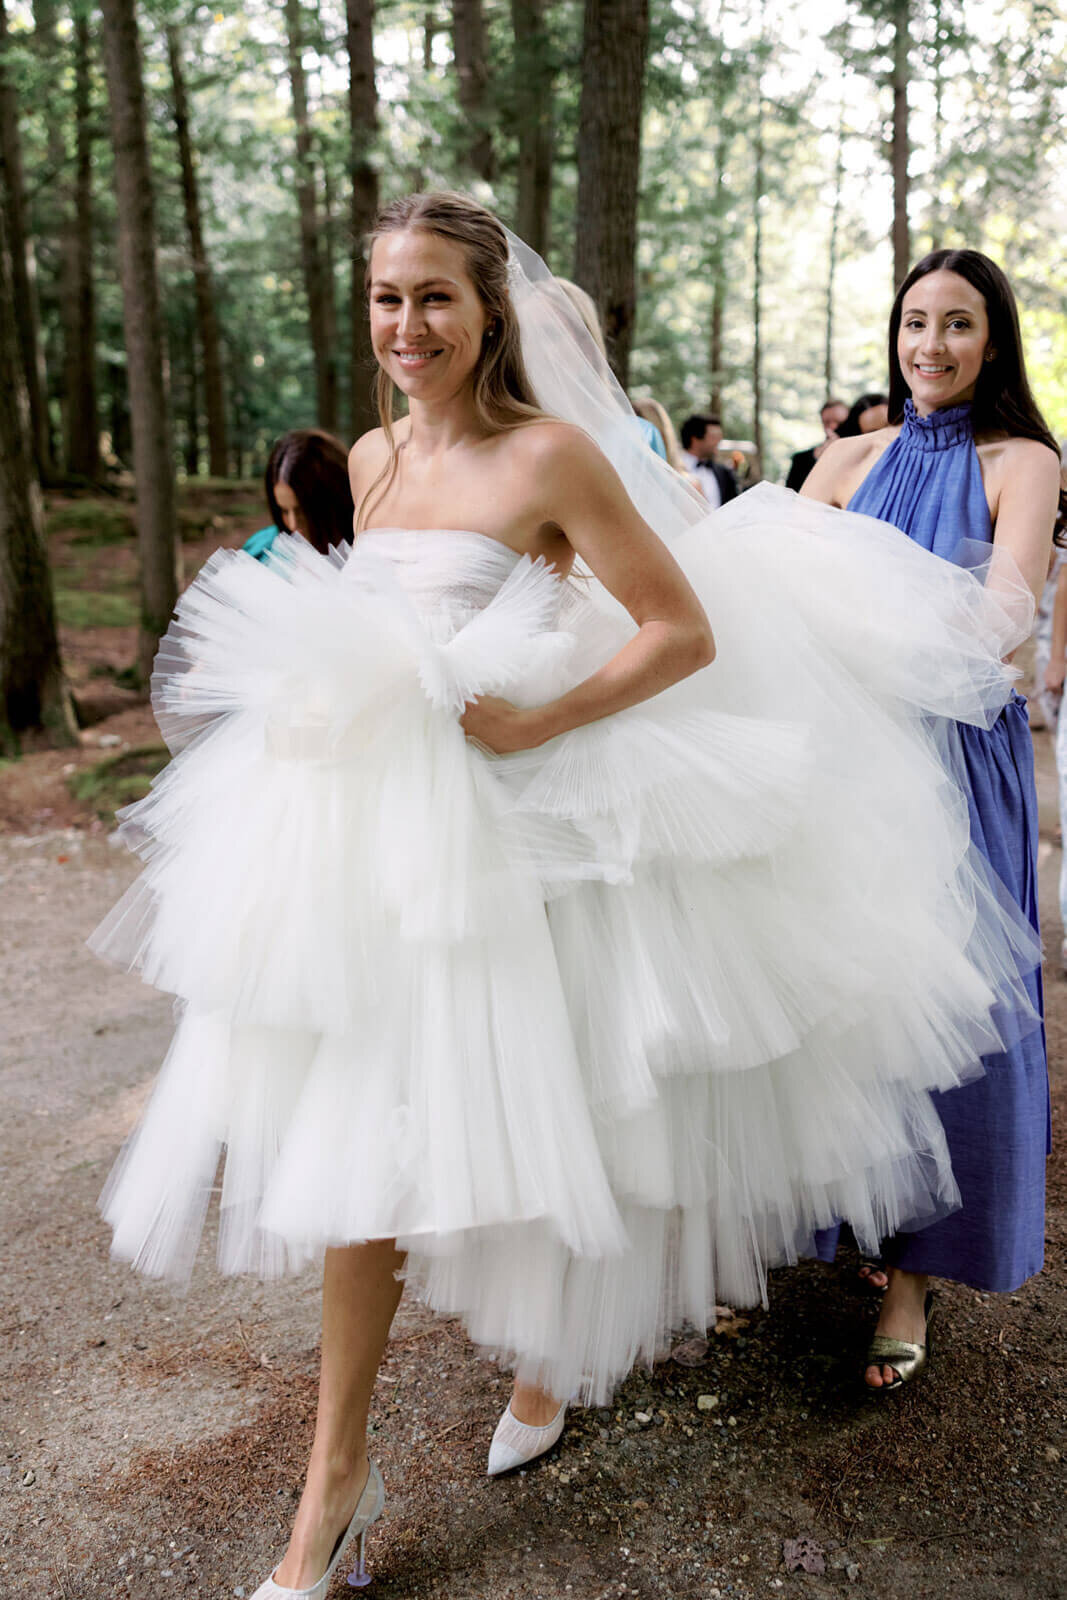 The bride is walking outdoors, lifting her wedding gown, and a bridesmaid is holding the gown's train at The Ausable Club,NY.